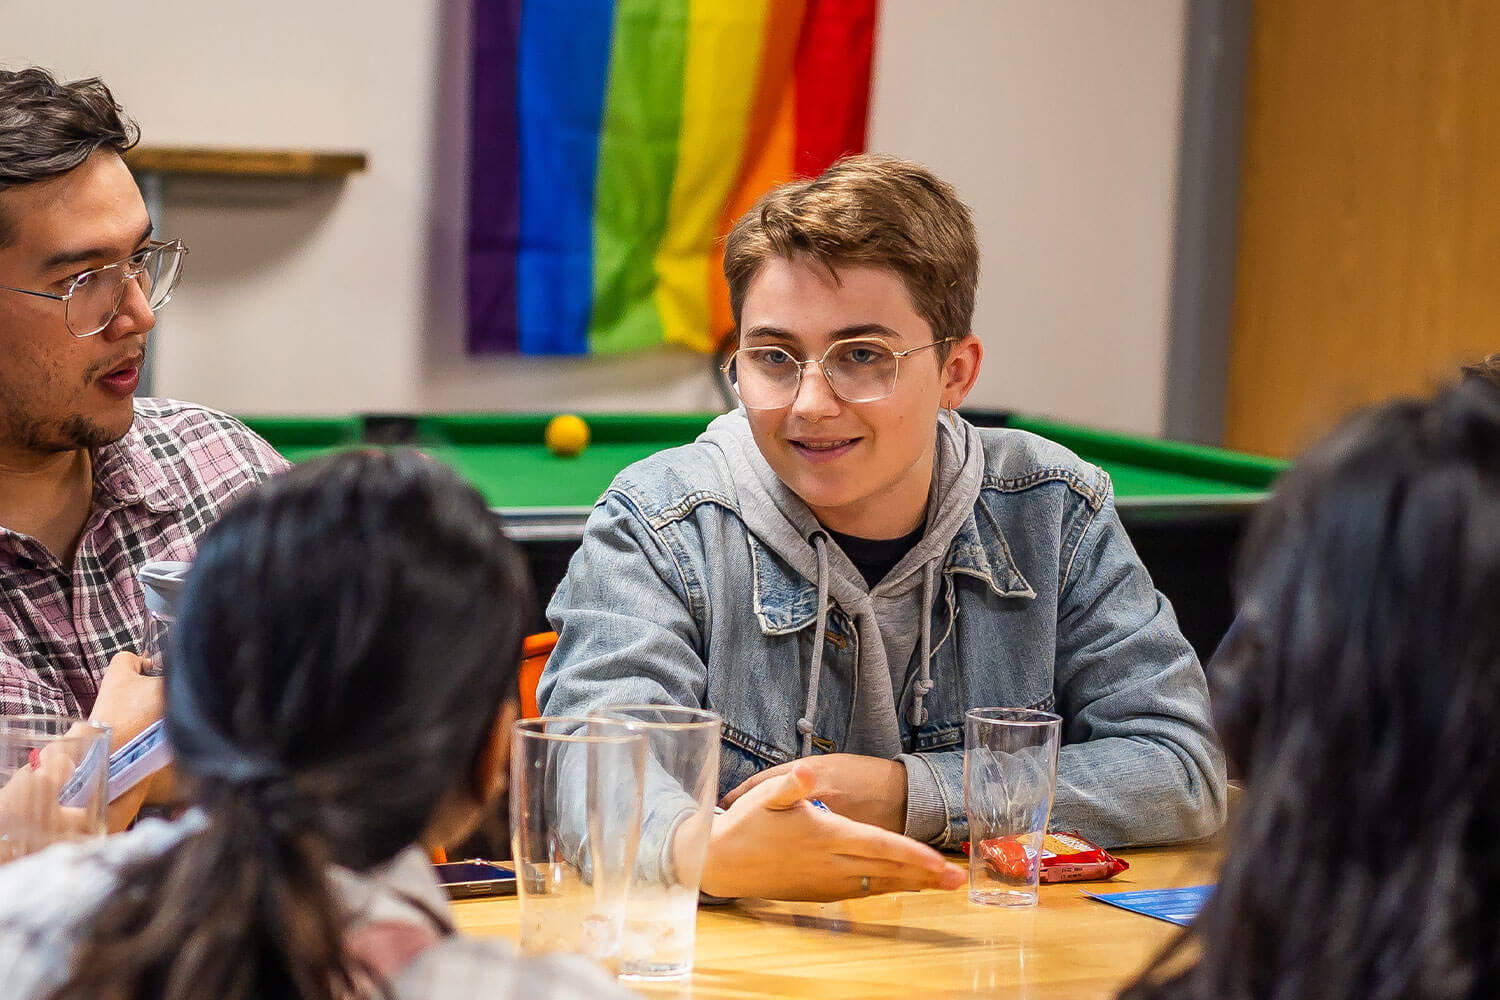 Four students sat together in the Student Union with a pool table and pride flag in the background